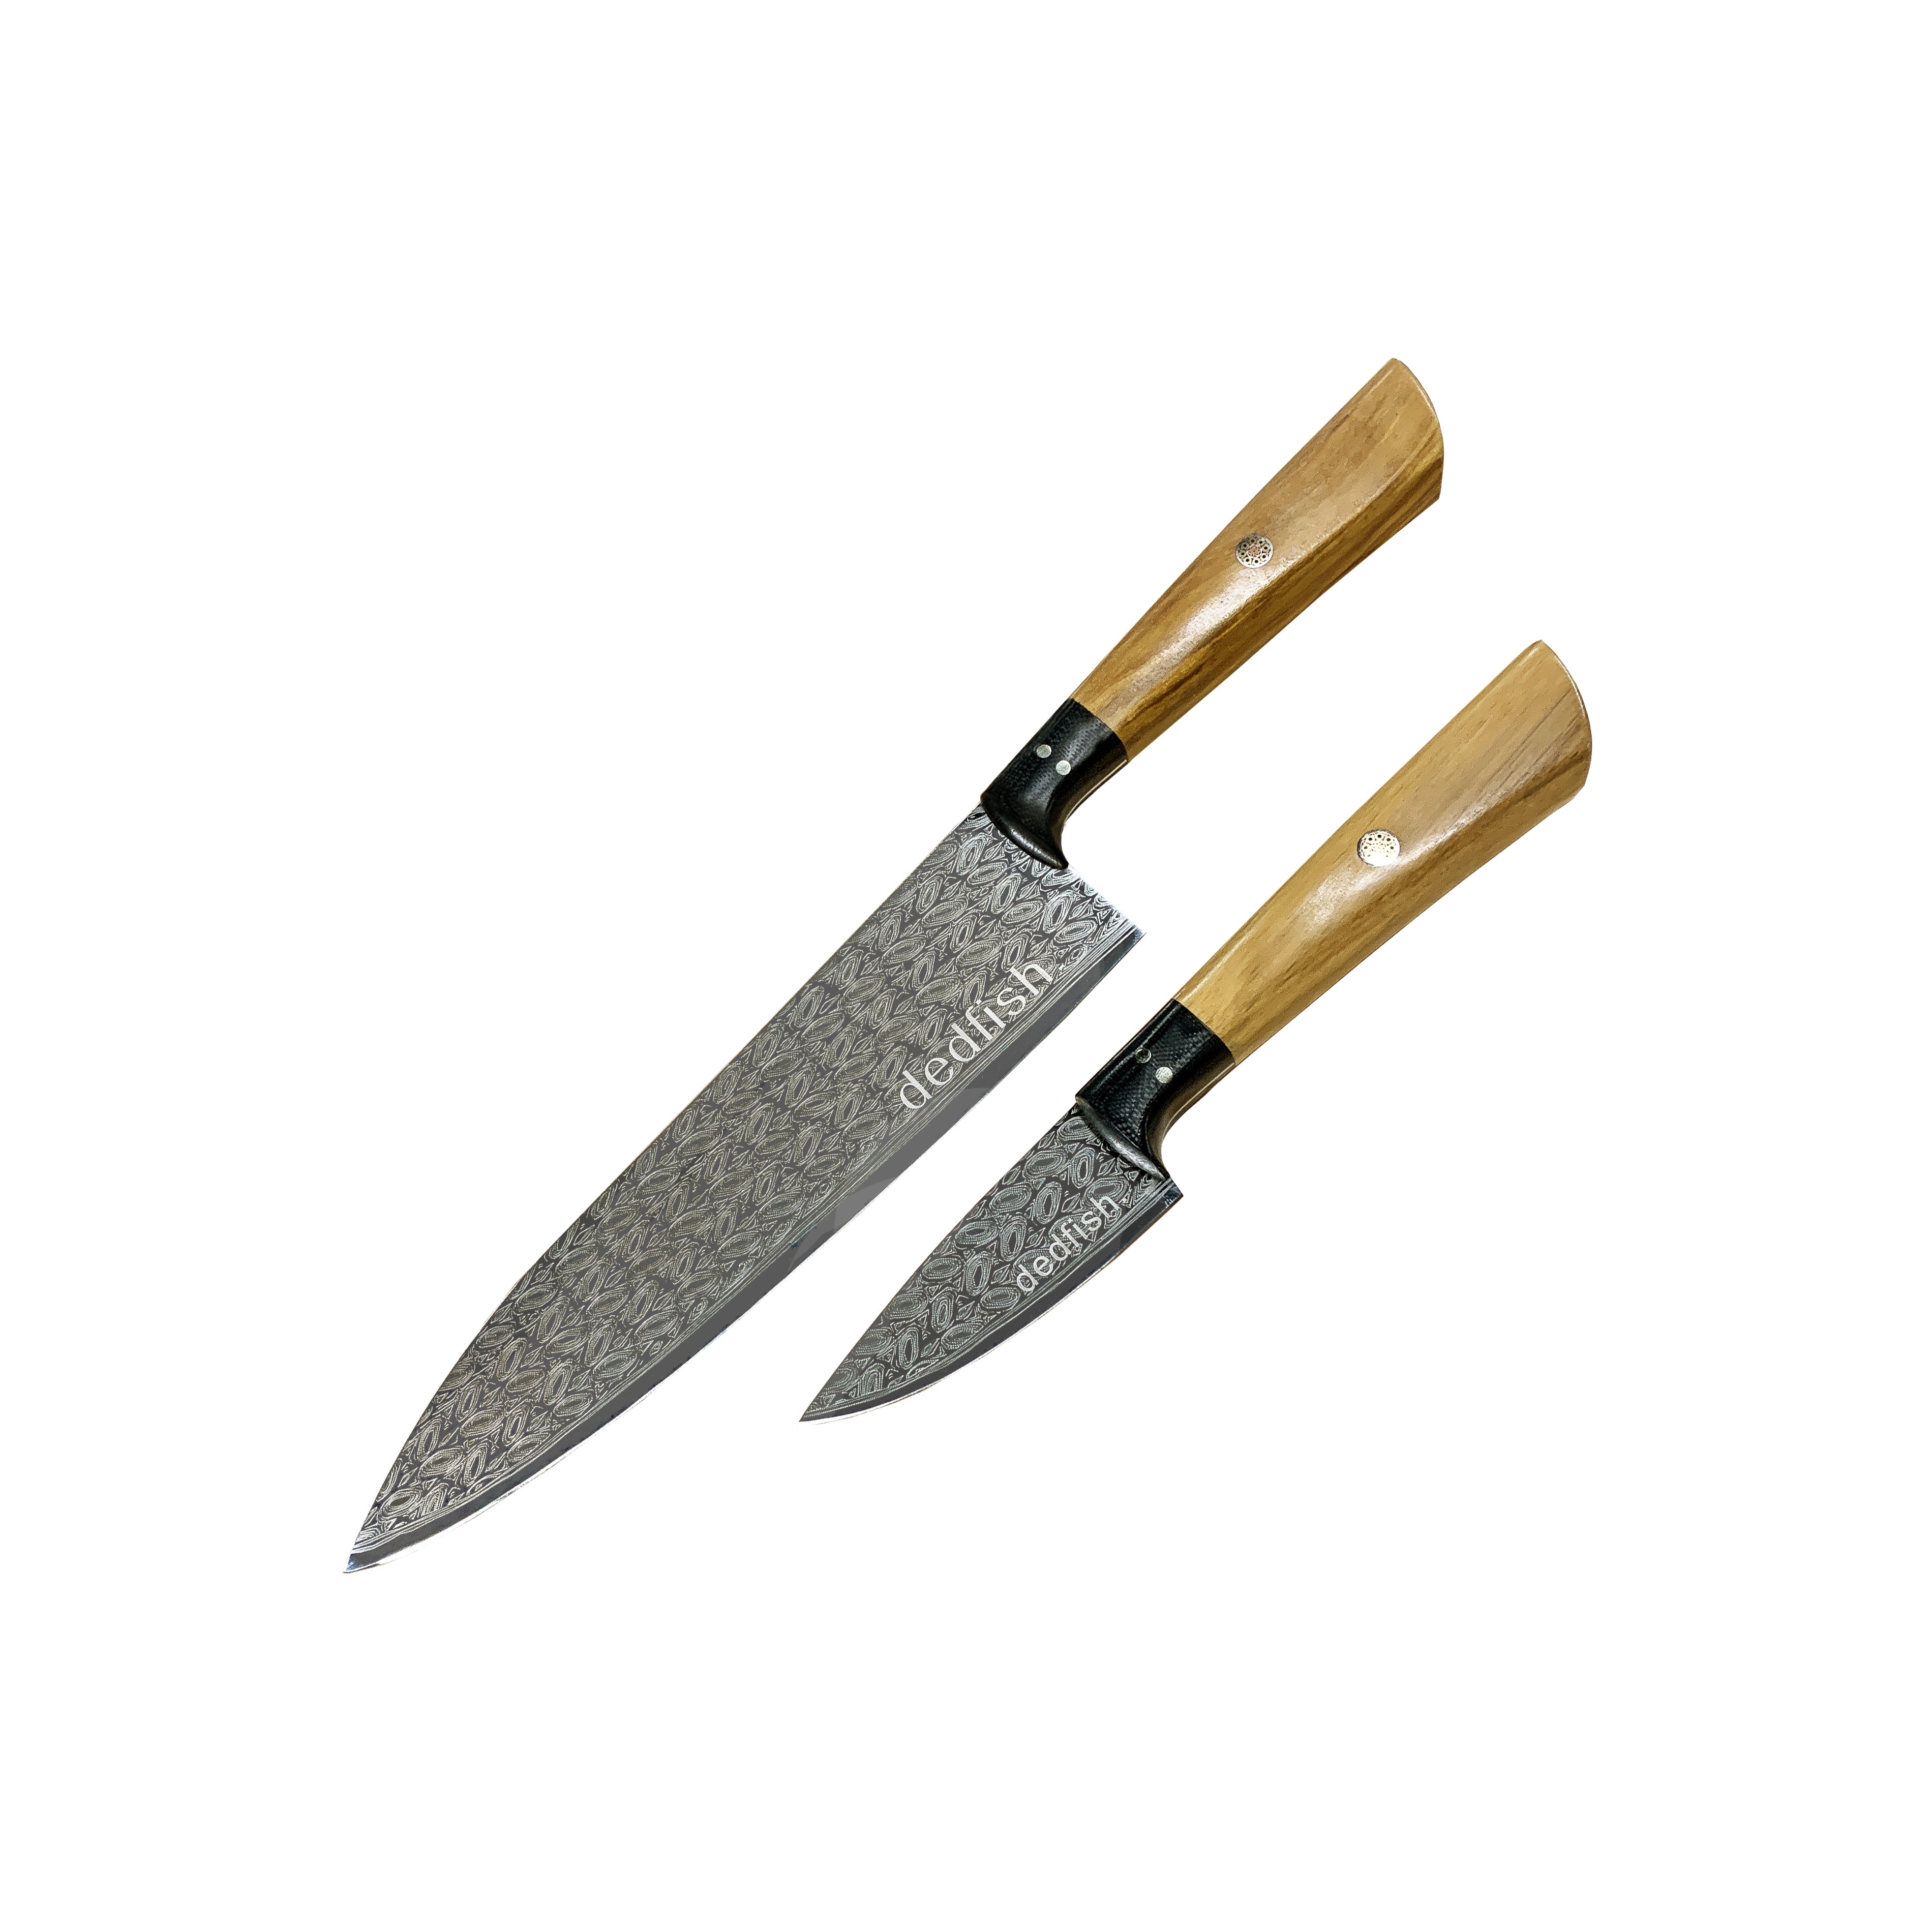 Gourmet Knife with Wood Handle and Leather Sheath Meat Kitchen